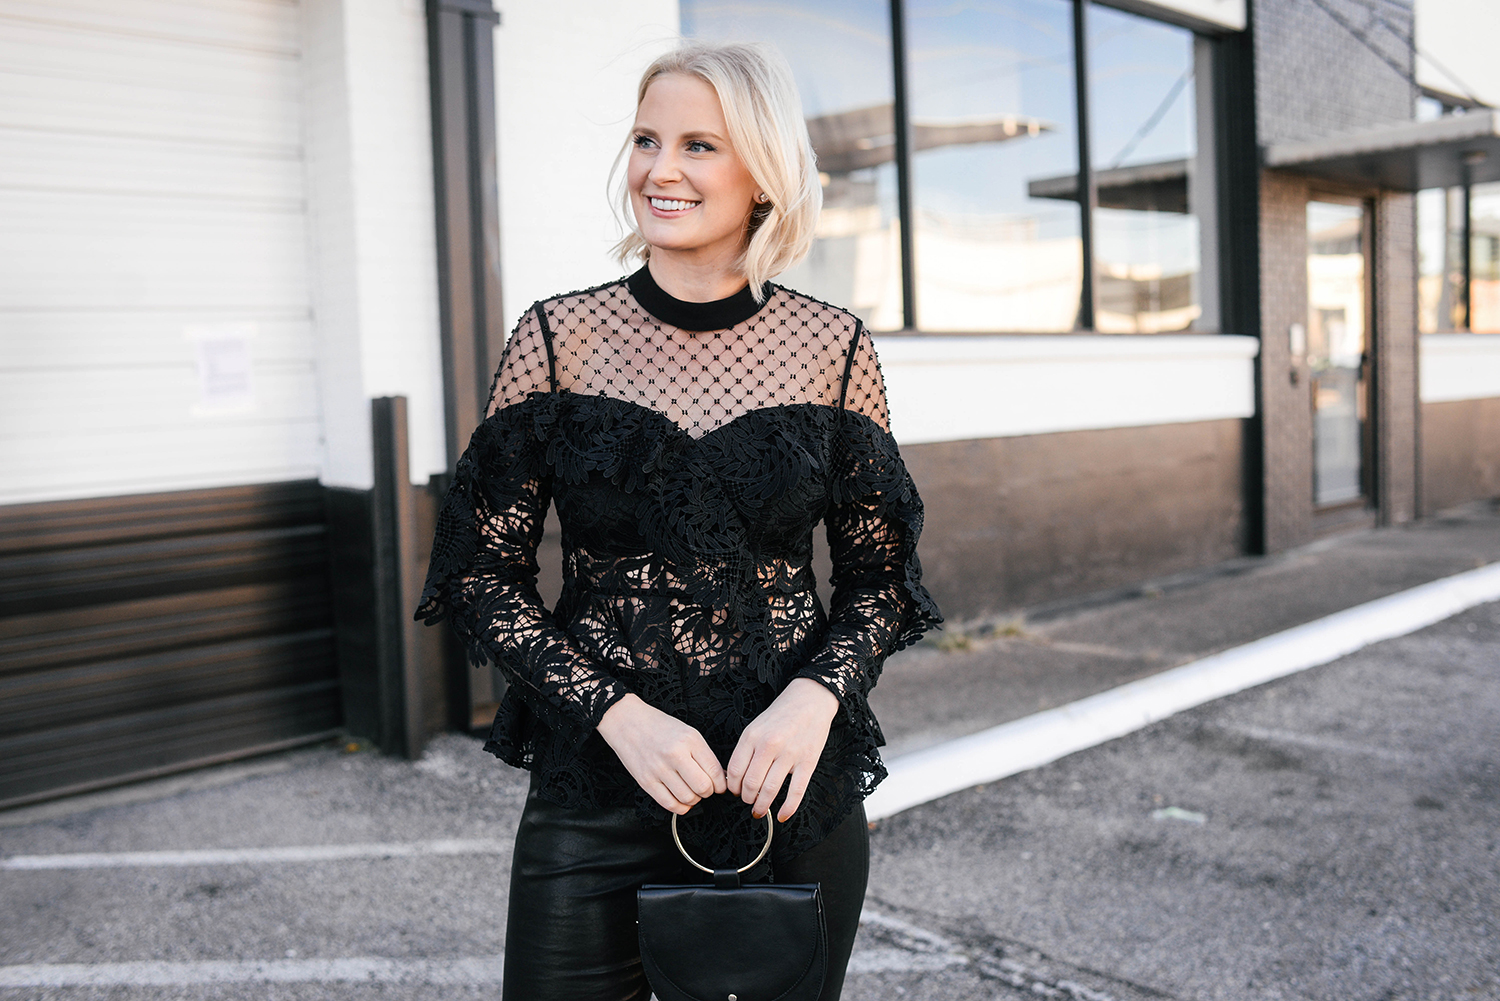 New Year's Eve Outfit Ideas | Pretty Statement Top and Leather Pants